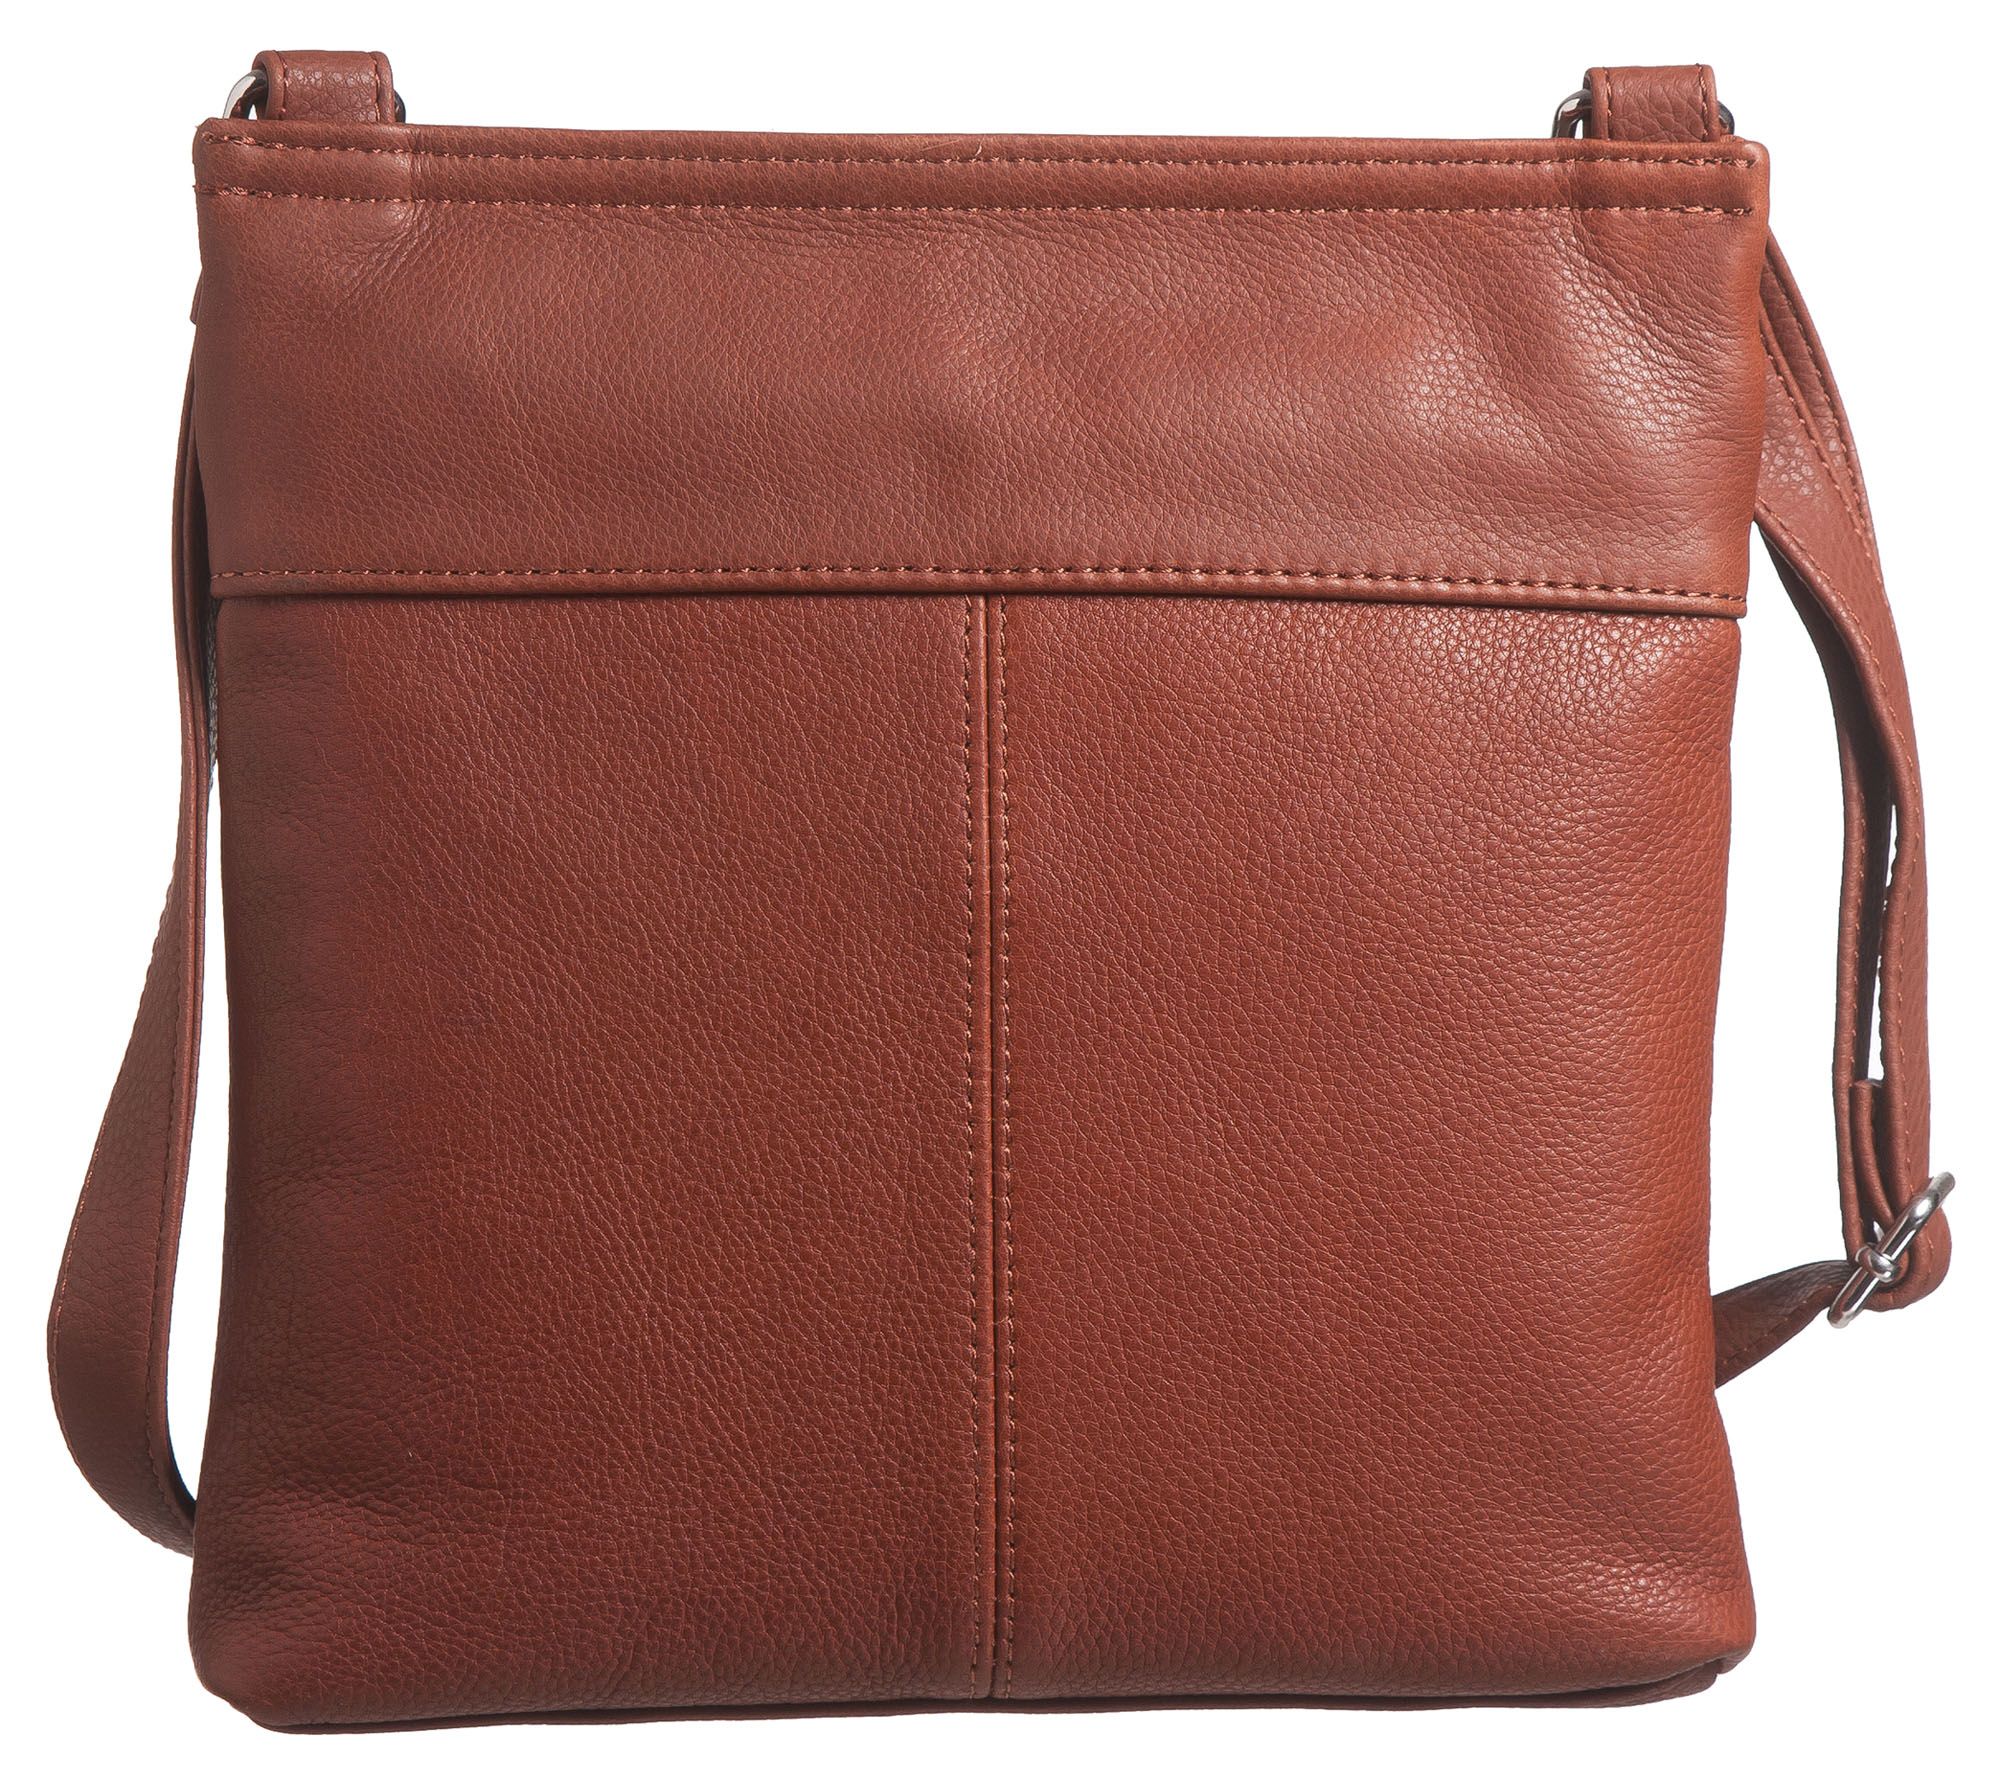 Stone Mountain USA Butter Leather North/South Crossbody Bag